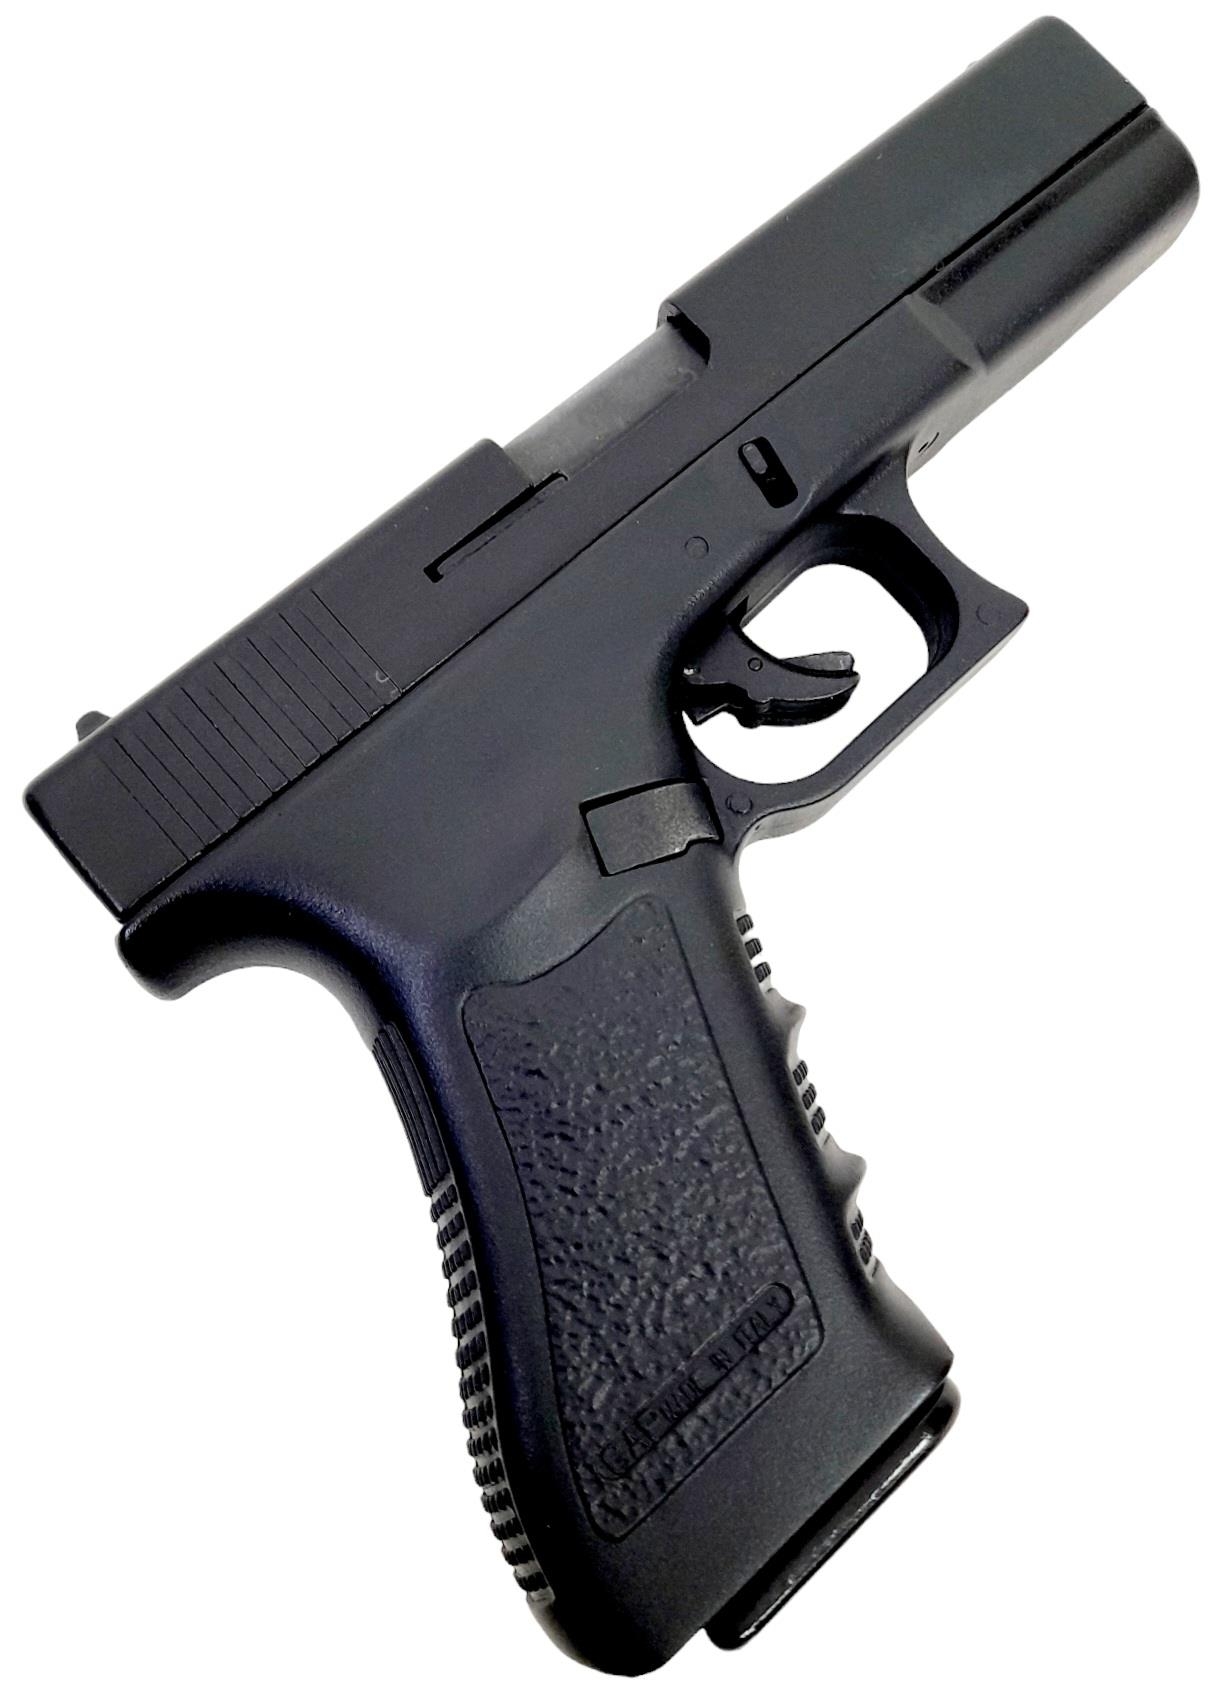 A Glock Gap 8mm Top Vented Blank Firing Pistol. Over 18 only. UK sales only. Blank guns should